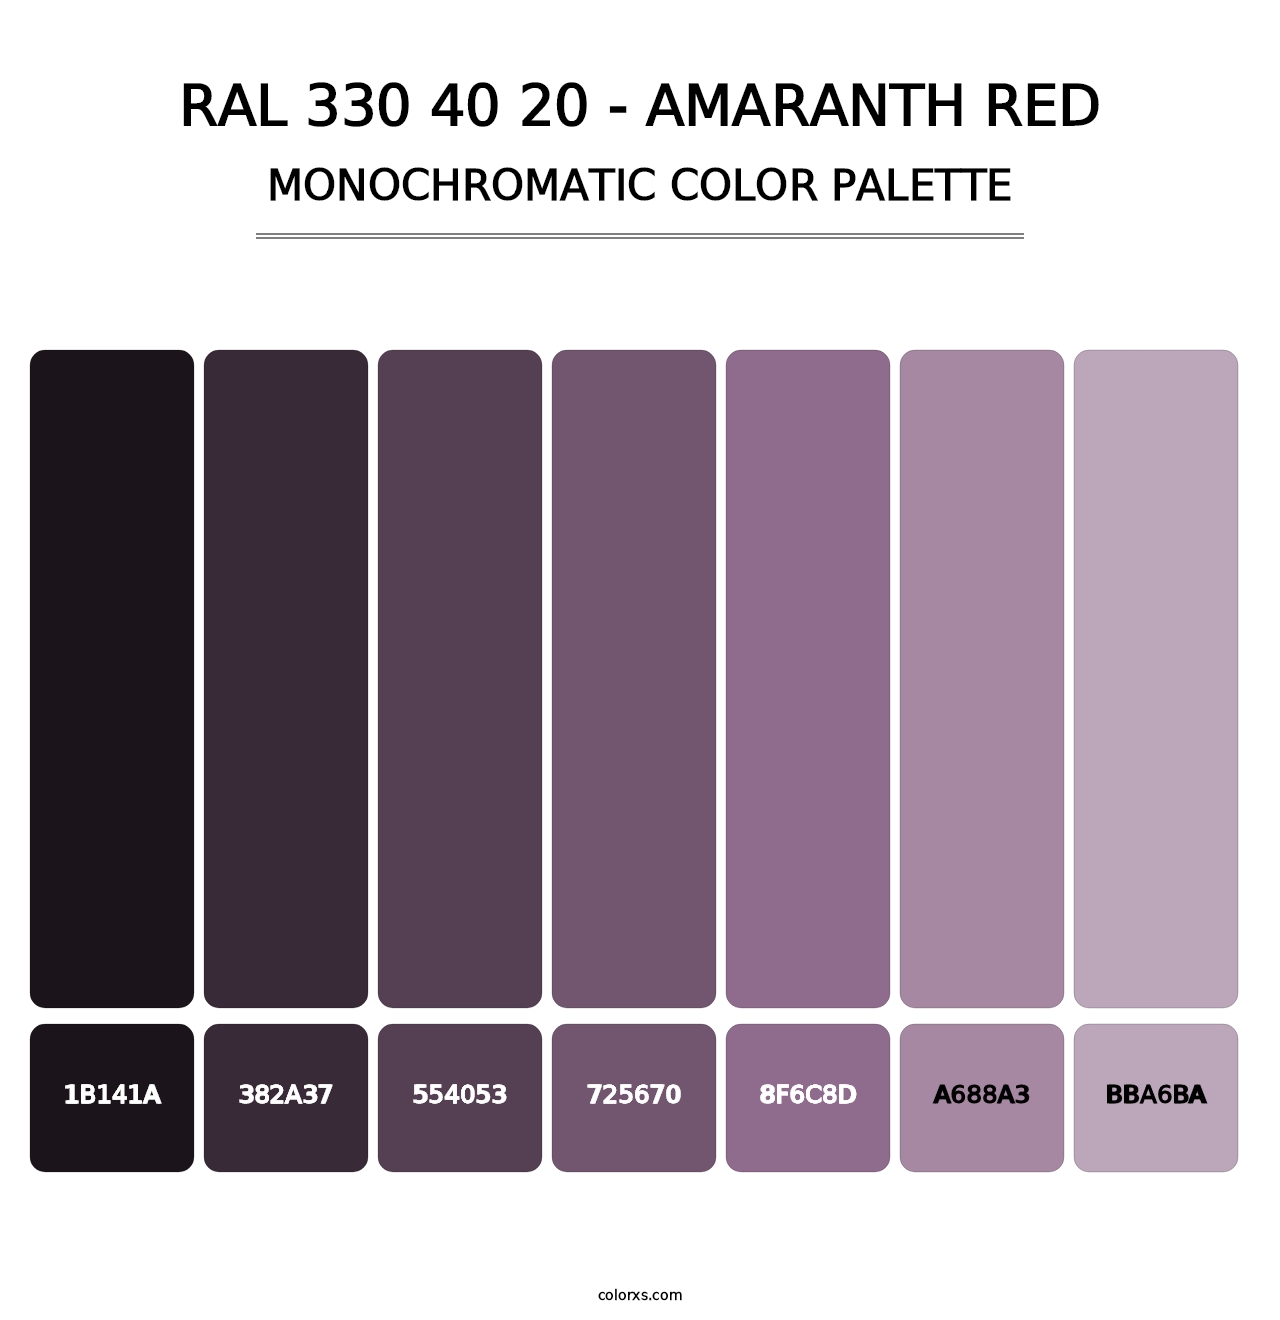 RAL 330 40 20 - Amaranth Red - Monochromatic Color Palette